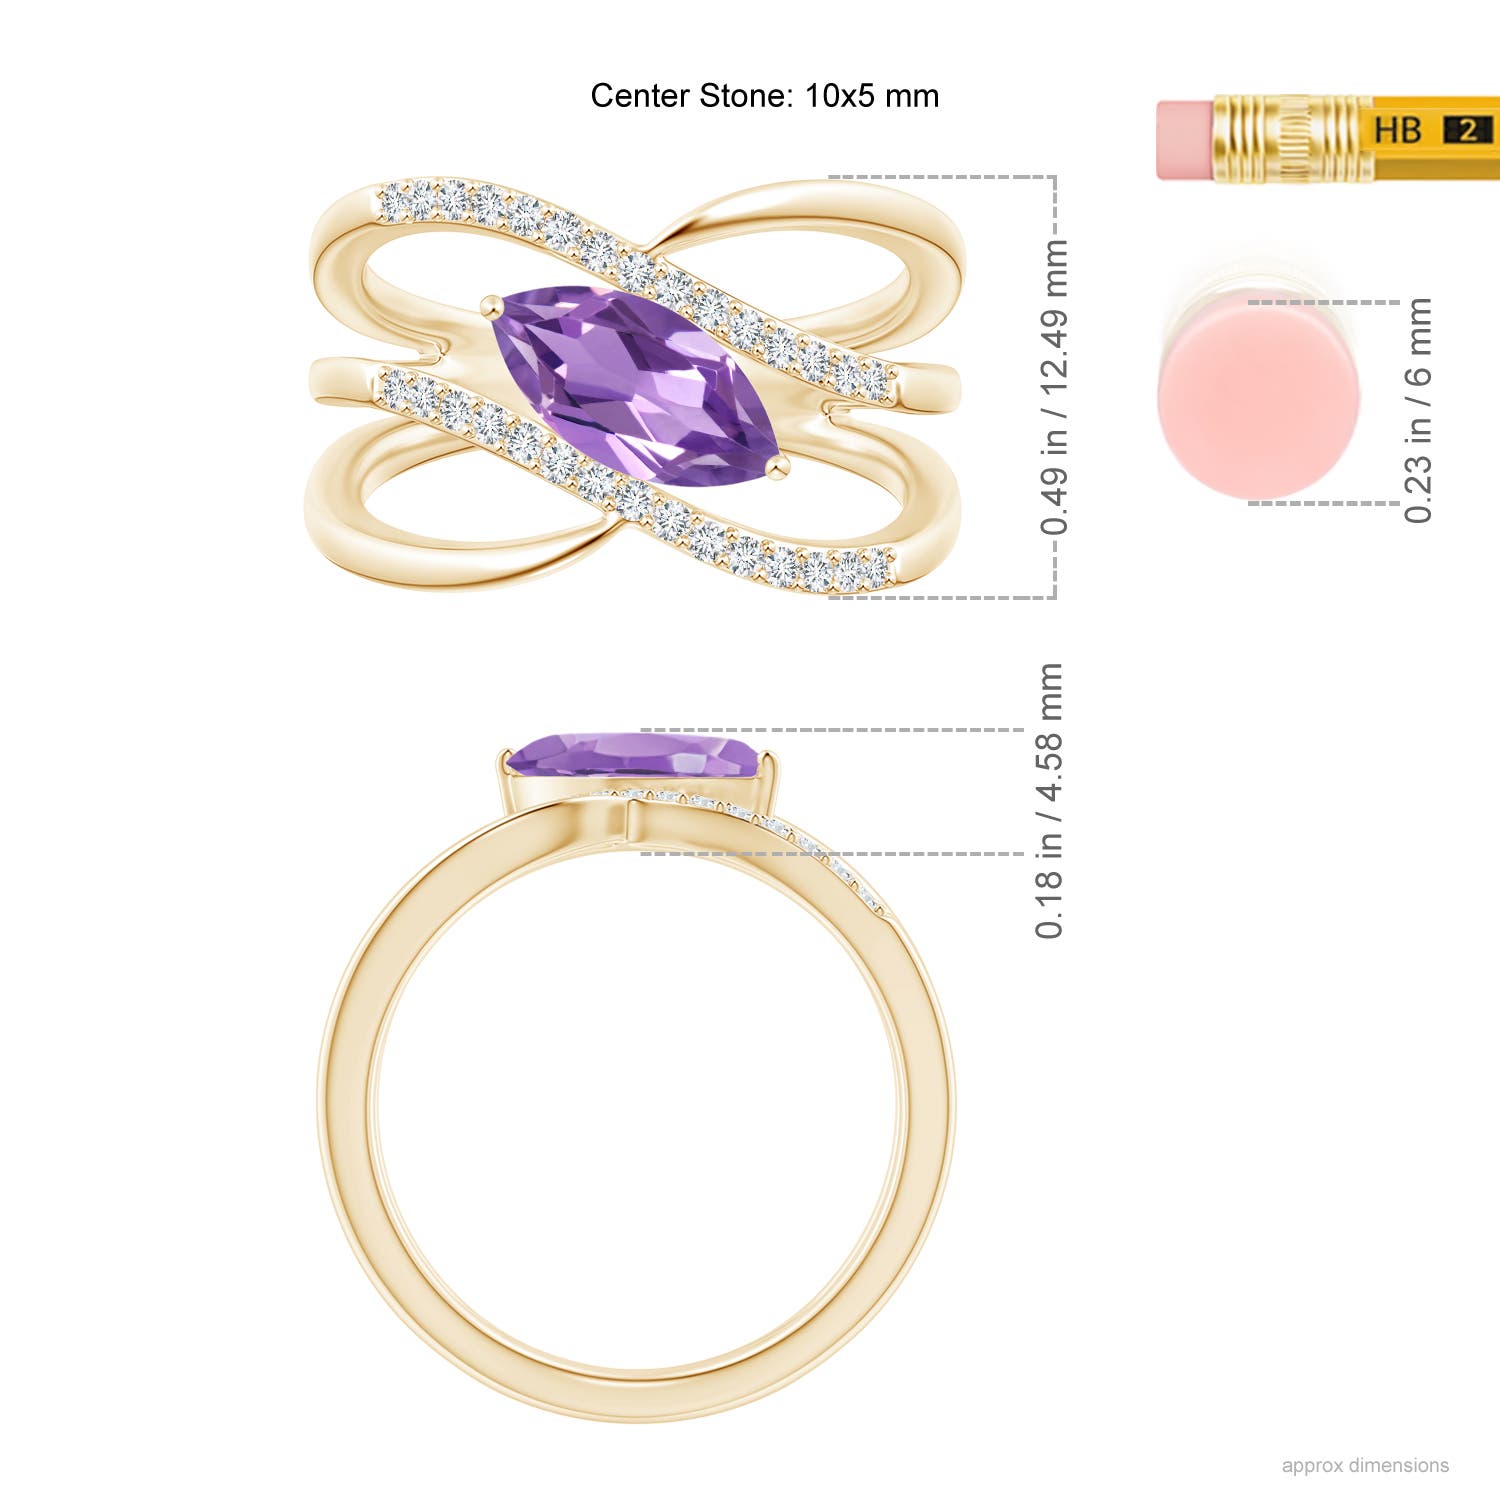 A - Amethyst / 1.13 CT / 14 KT Yellow Gold